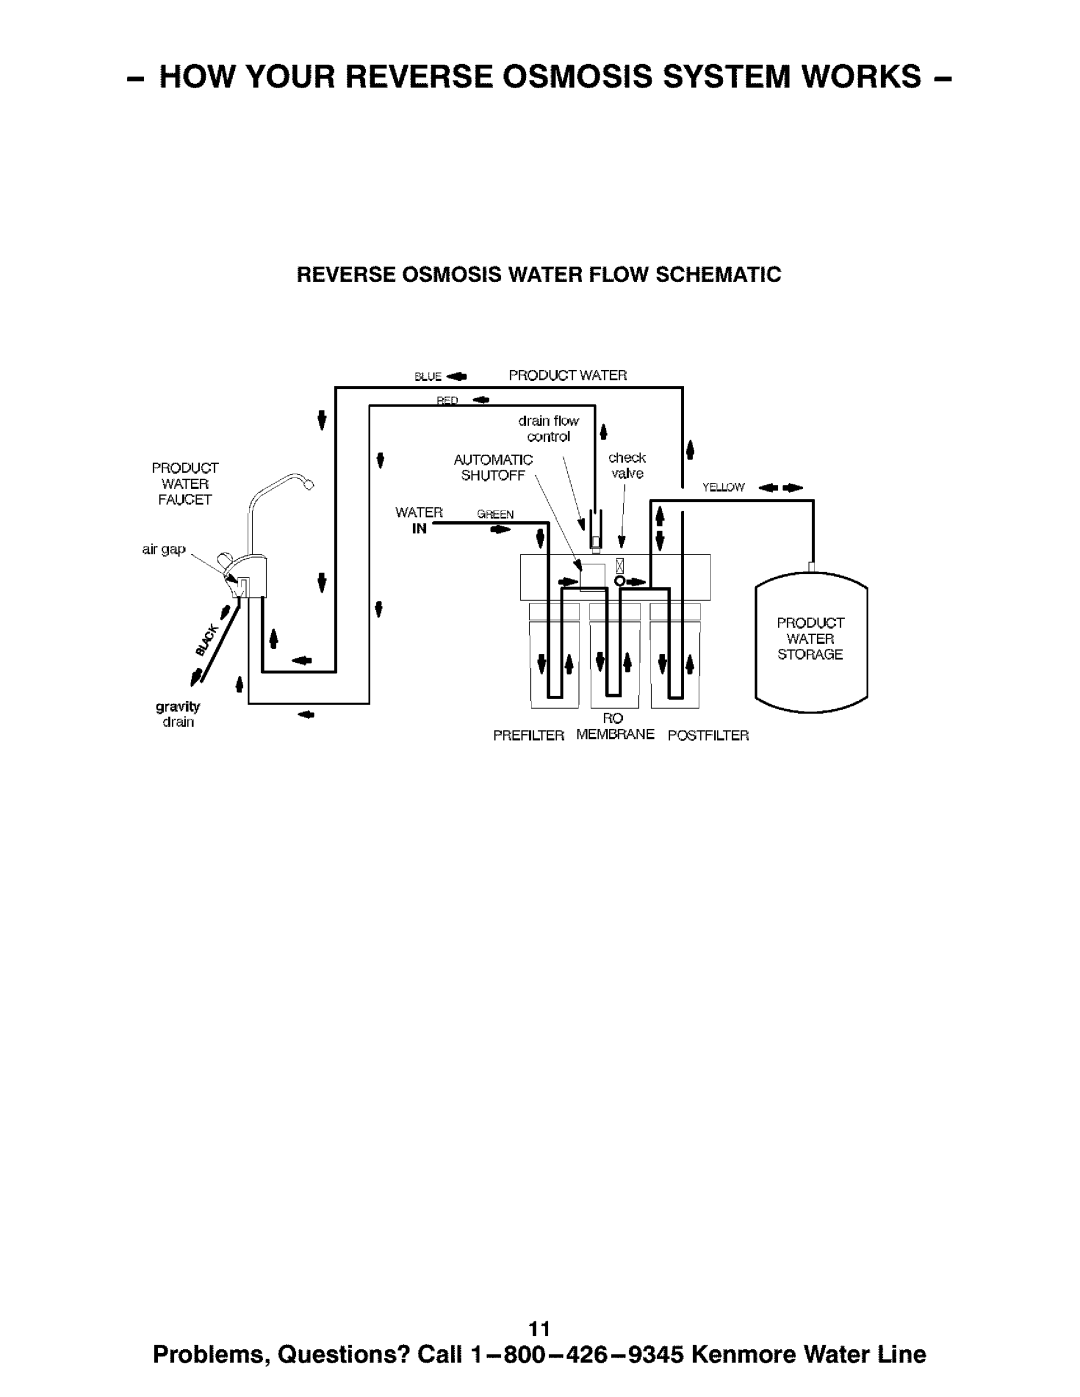 Kenmore ULTRAFILTER 300 625.384720 How Your Reverse Osmosis System Works, Reverse Osmosis Water Flow Schematic, gra_viLy 